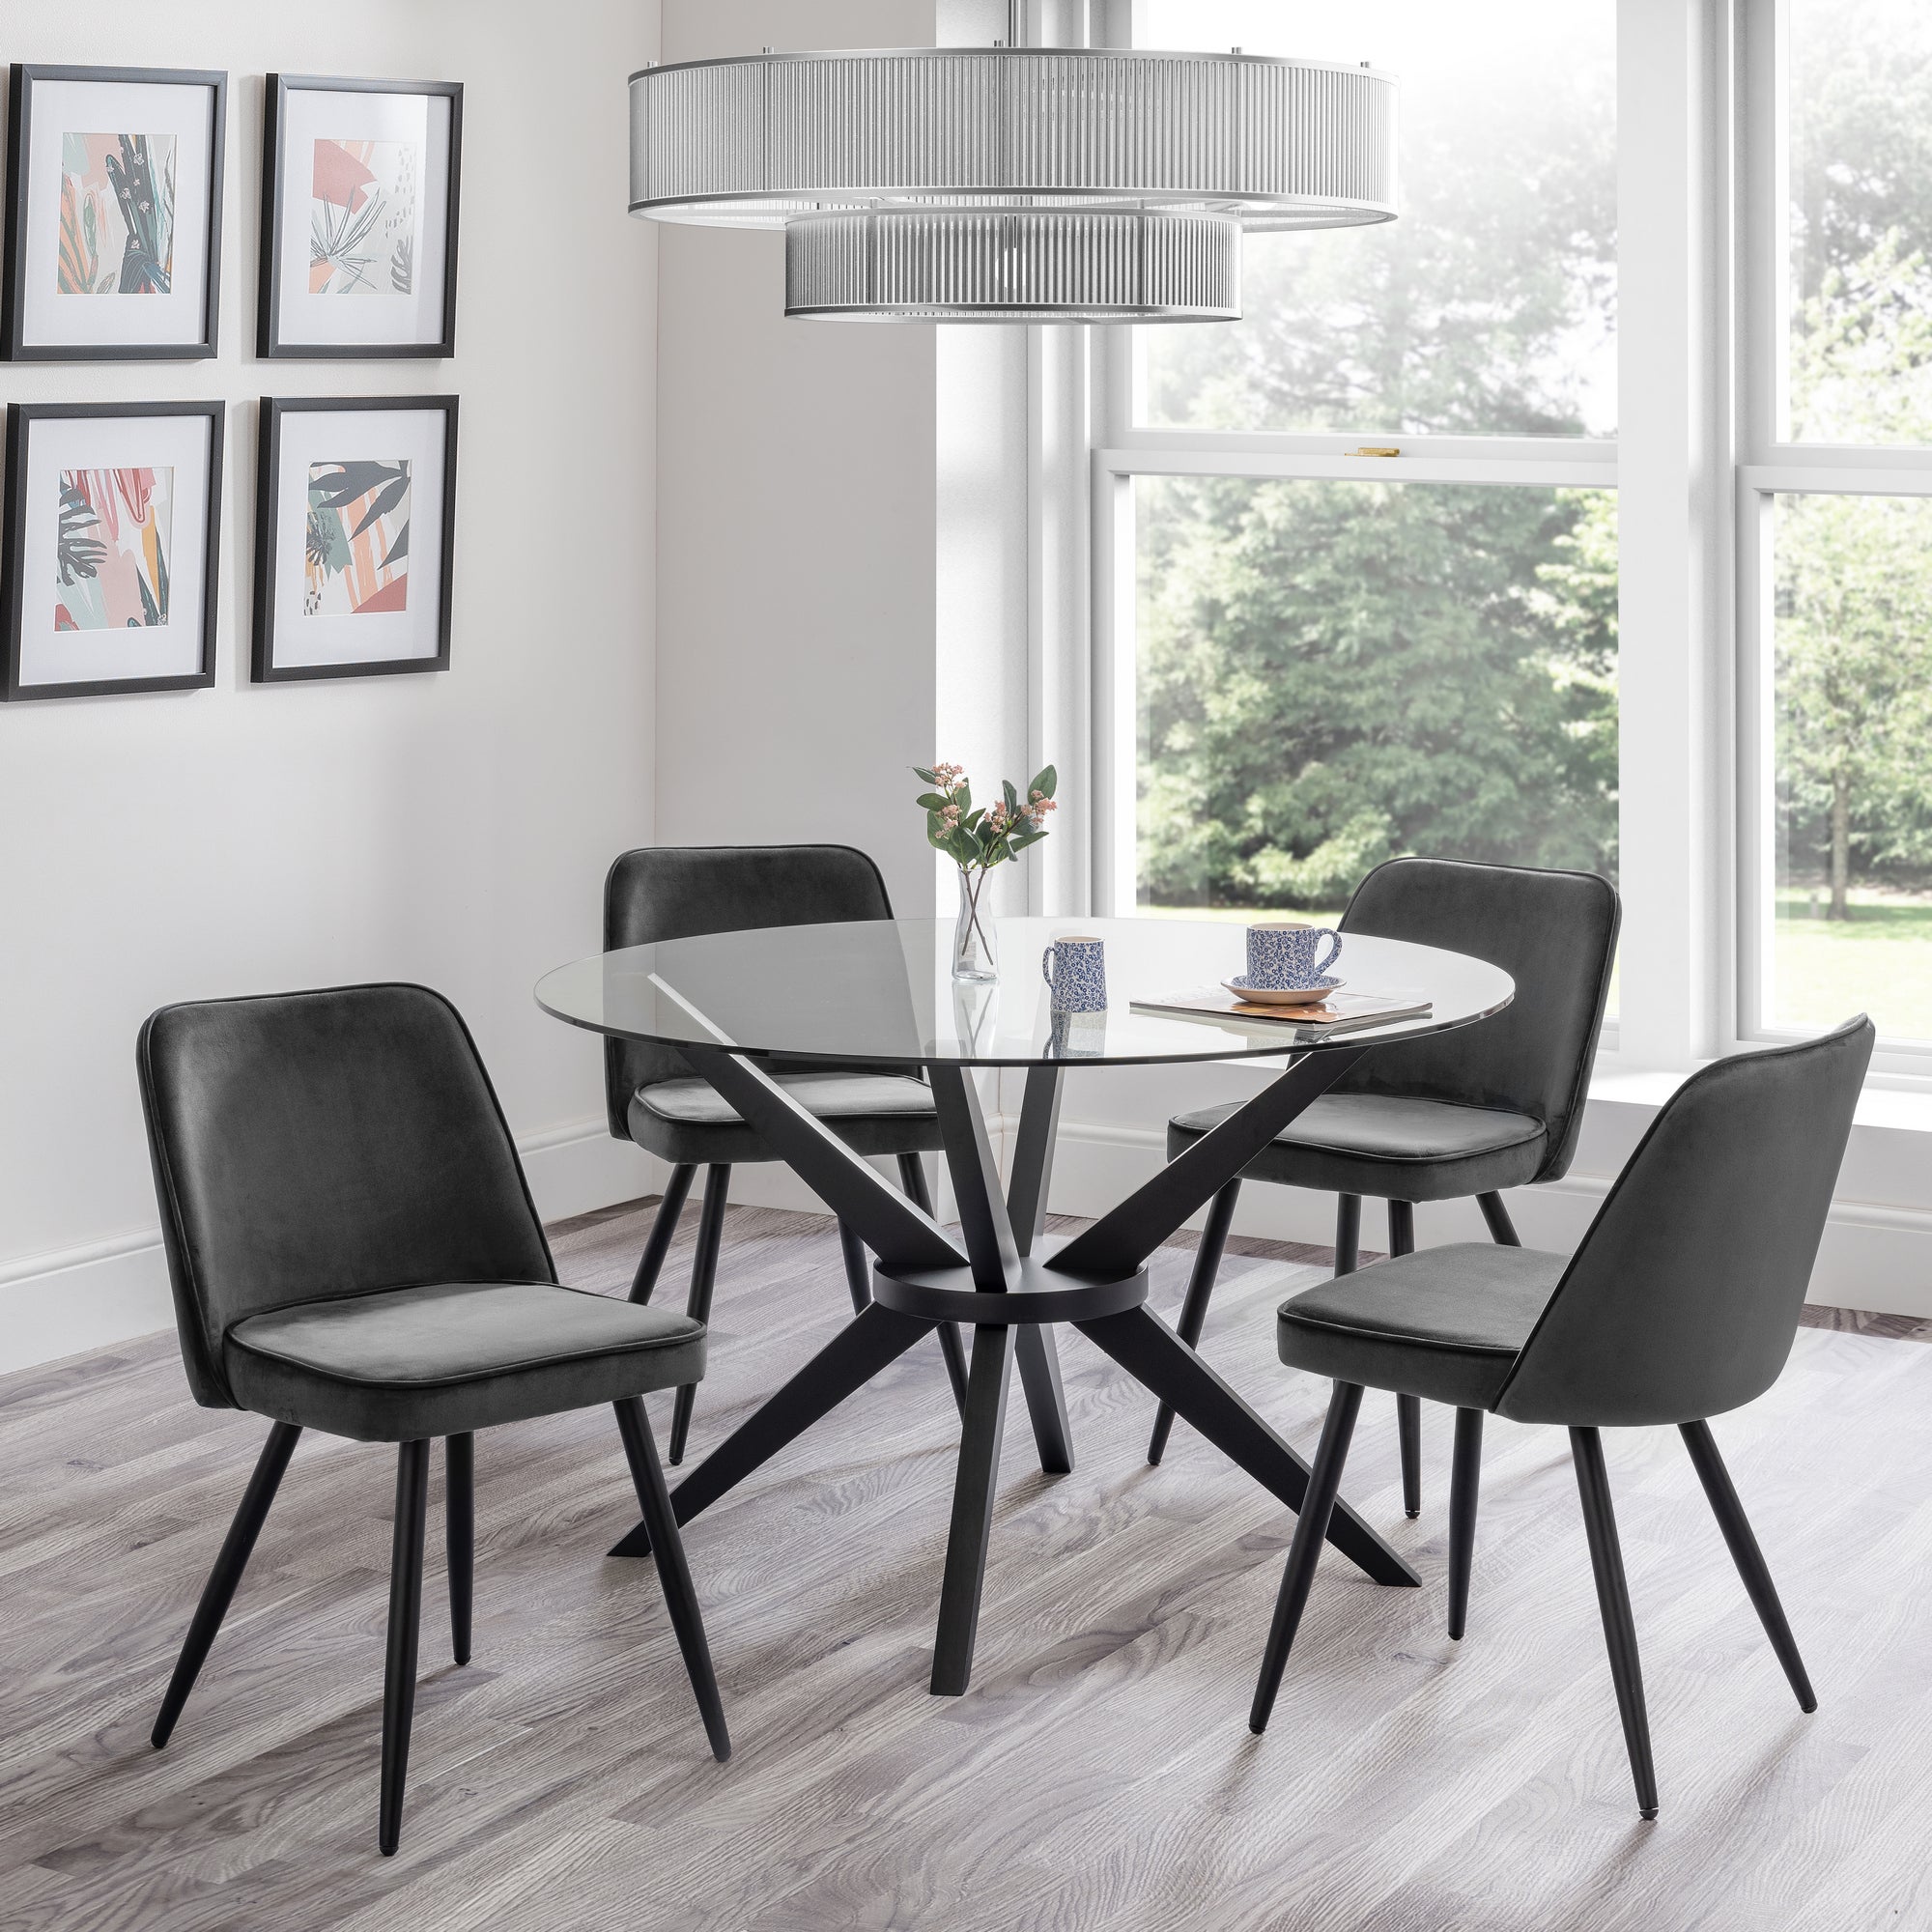 Hayden Round Glass Top Dining Table With 4 Burgess Chairs Clearblack